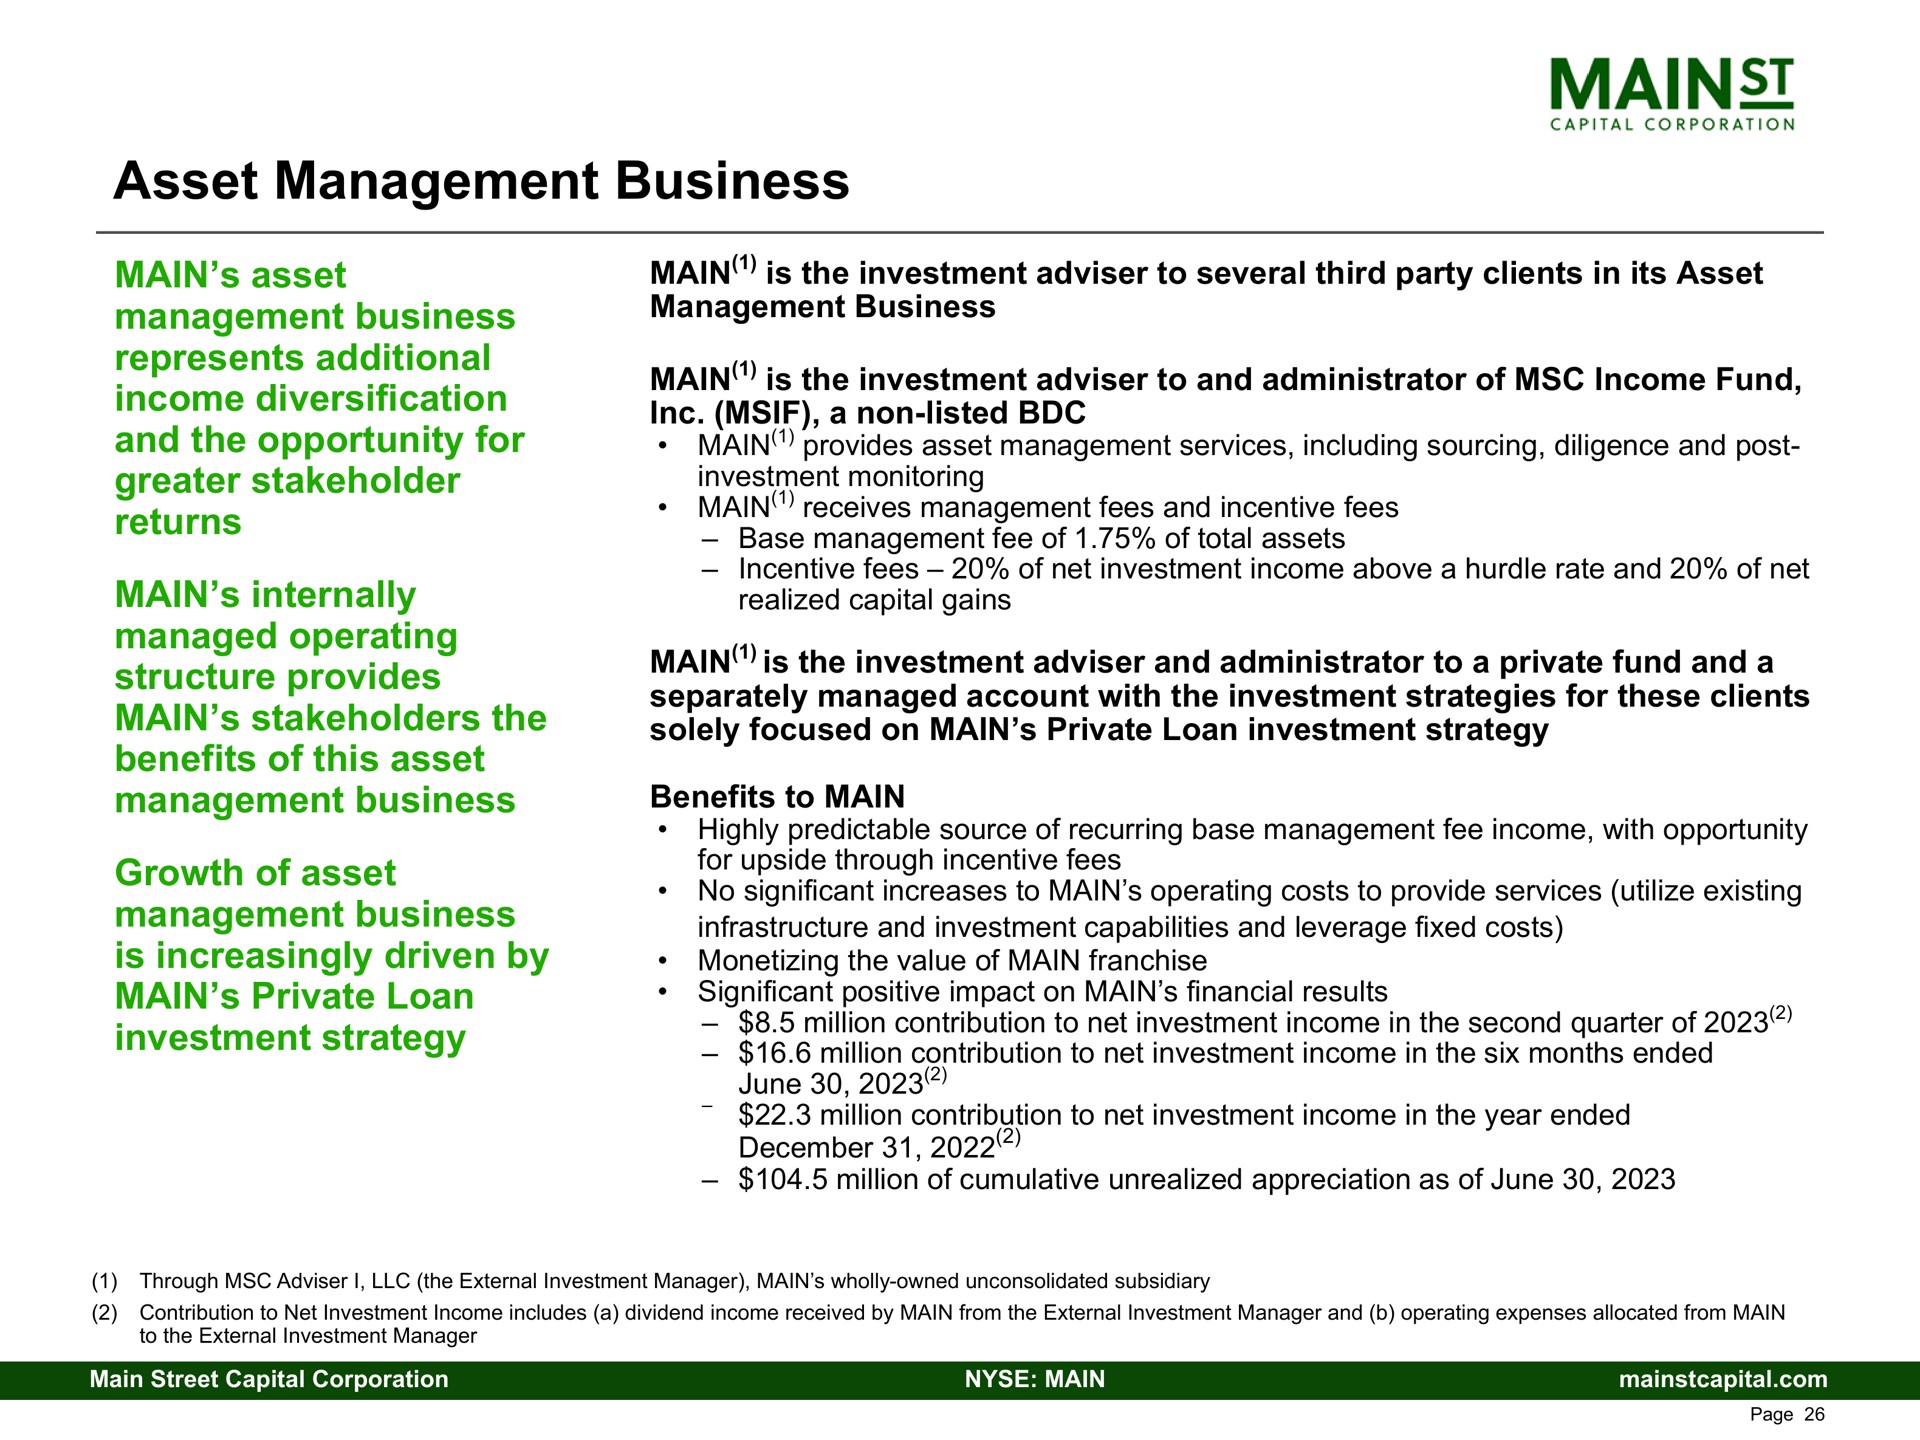 asset management business main asset management business represents additional income diversification and the opportunity for greater stakeholder returns main internally managed operating structure provides main stakeholders the benefits of this asset management business growth of asset management business is increasingly driven by main private loan investment strategy | Main Street Capital